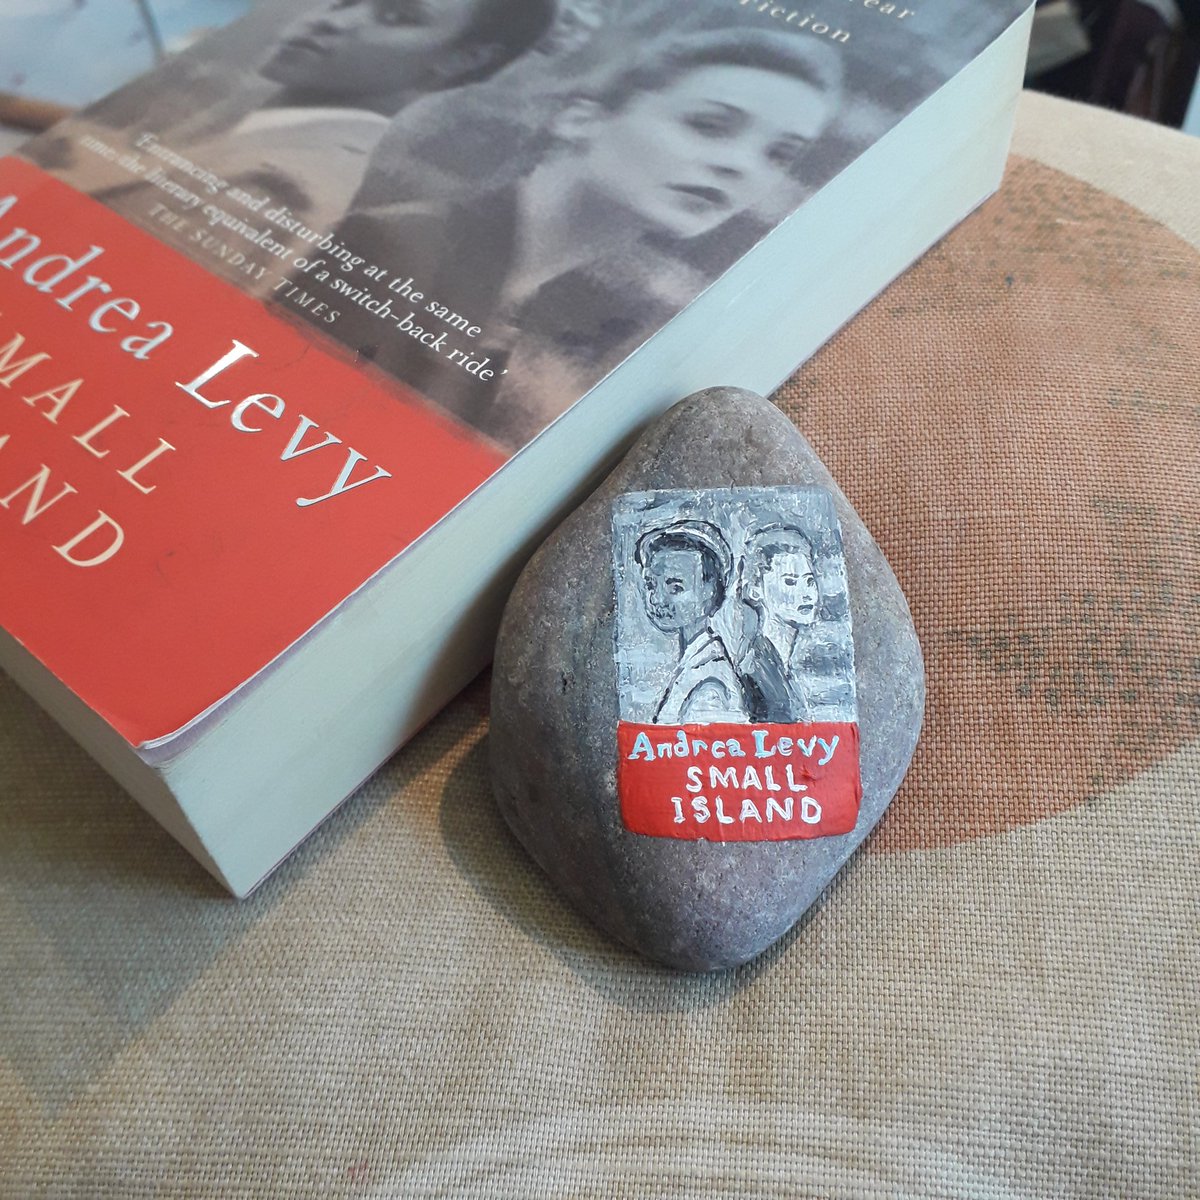 Small Island by Andrea Levy painted on a rock to be hidden in my library  @headlinepg